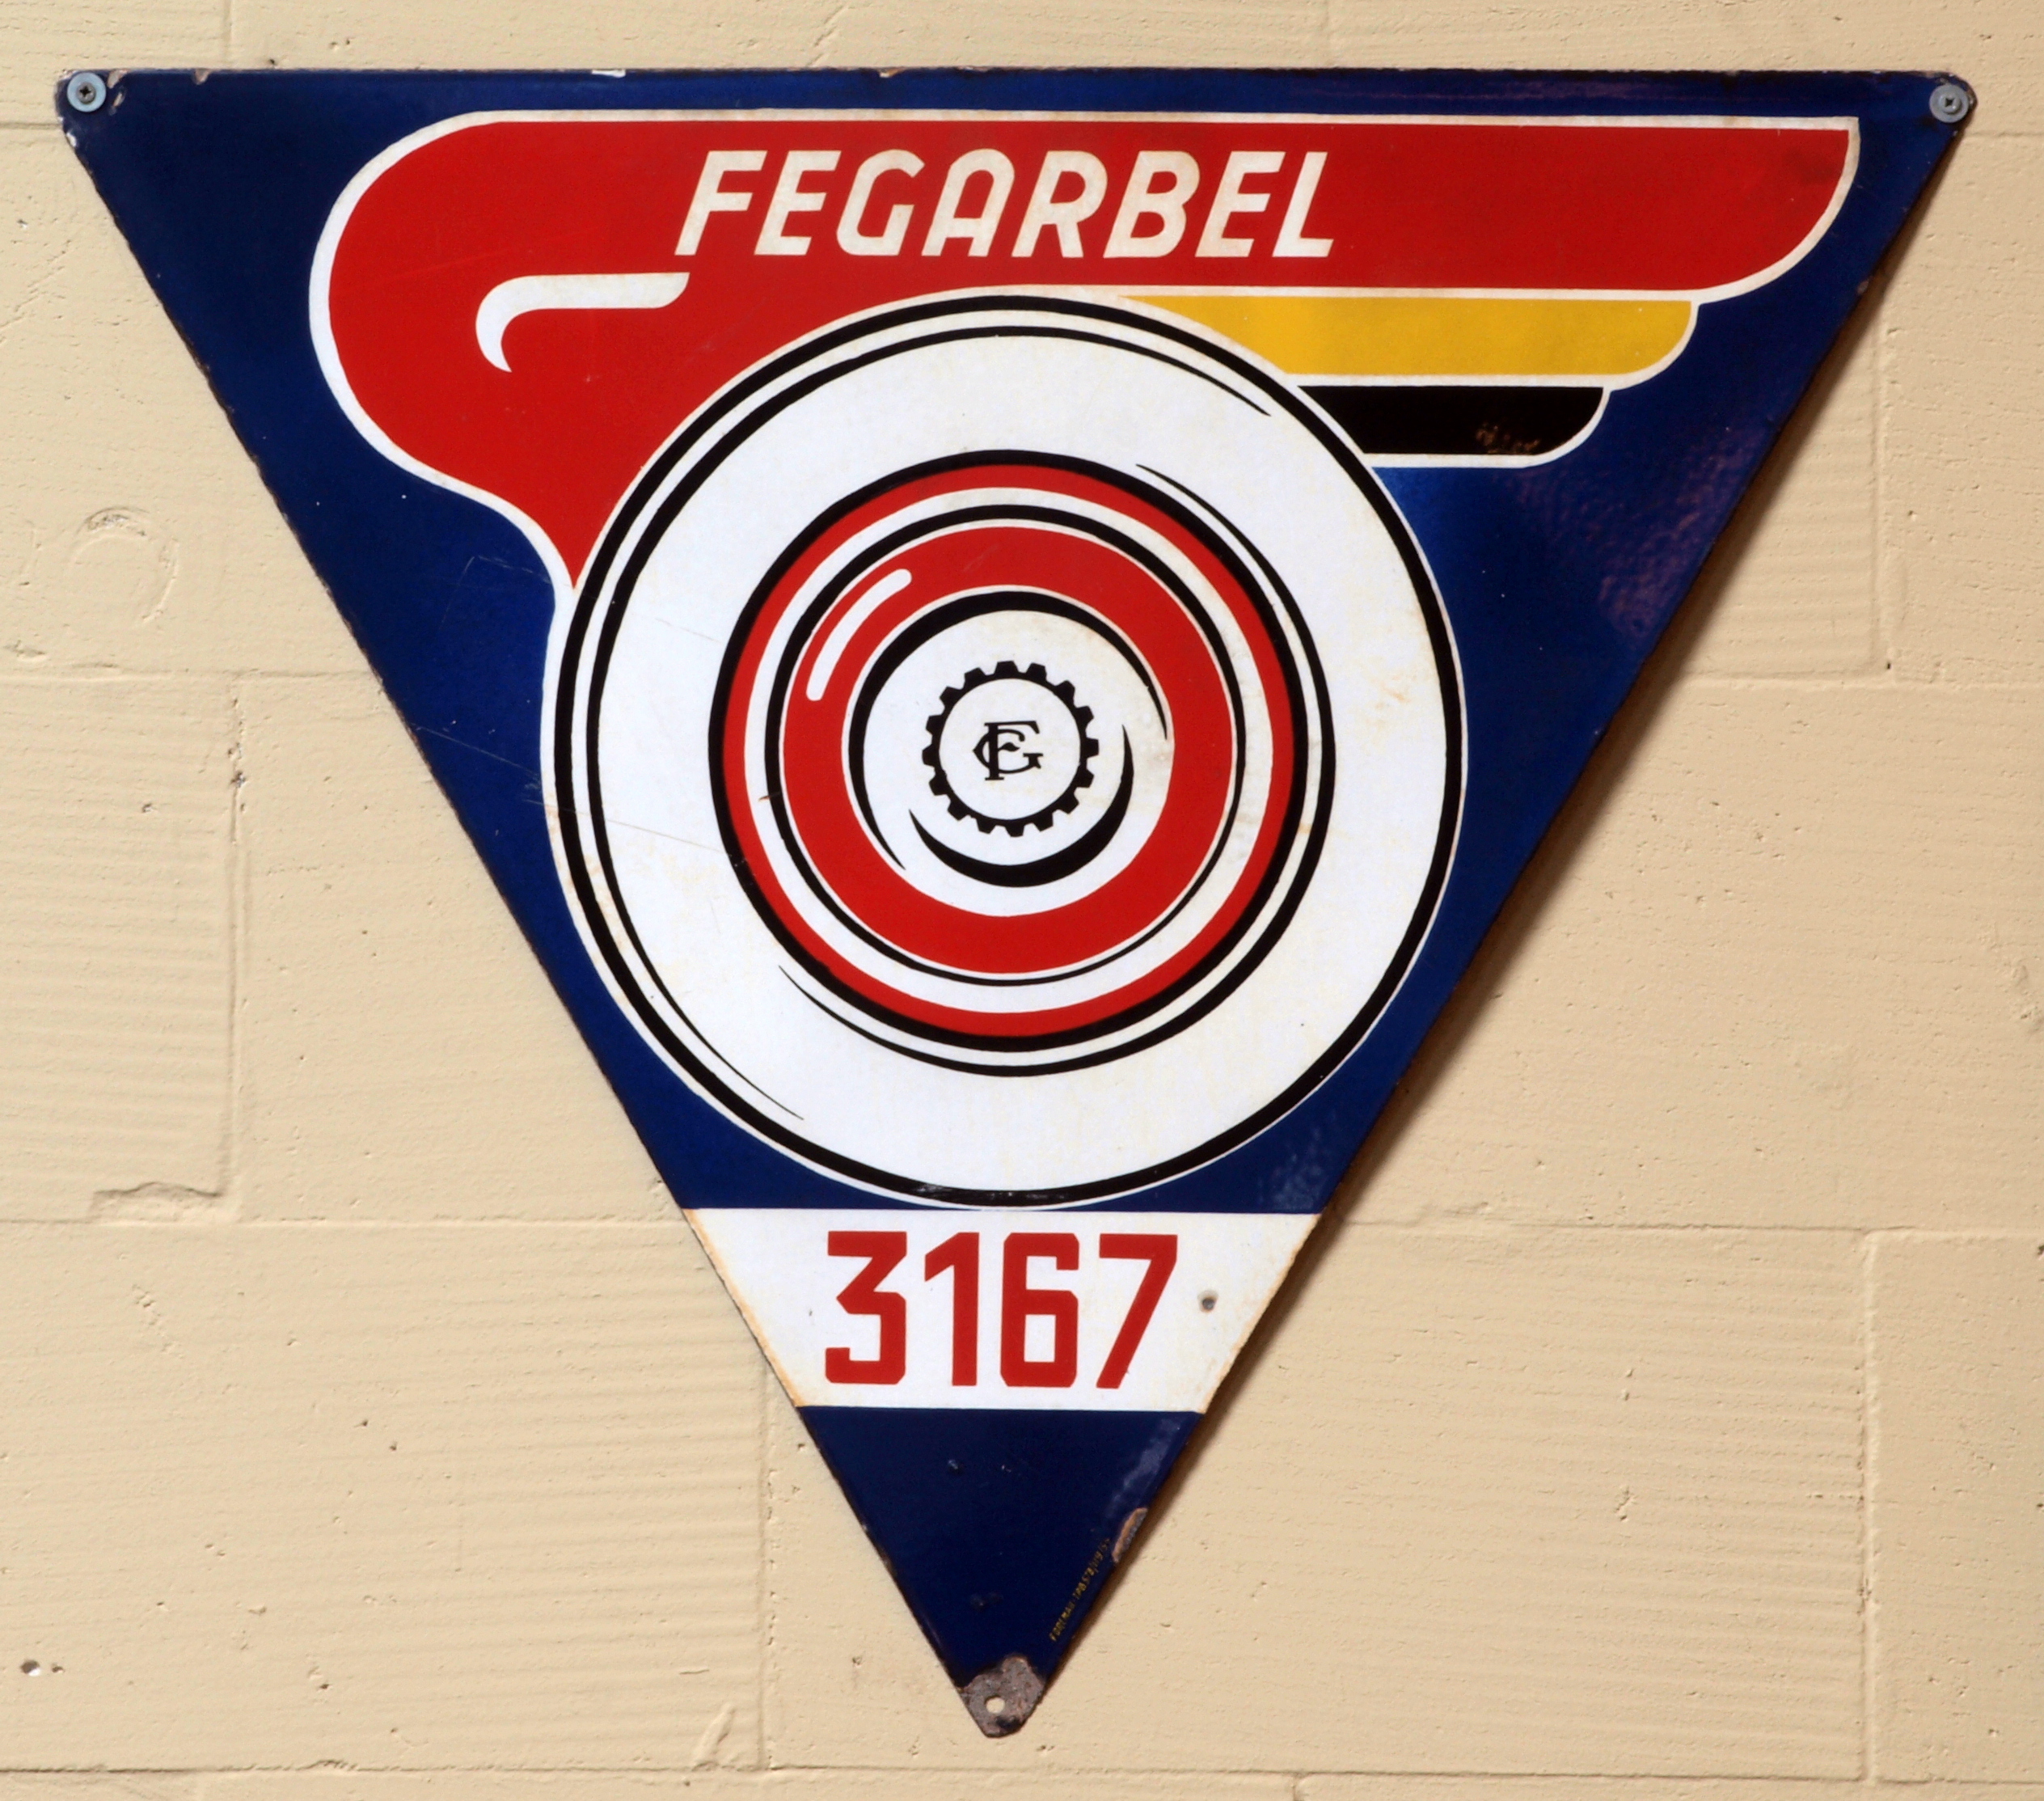 File:Fegarbel 3167, Enamel advert sign at the den hartog ford museum  pic-014.JPG - Wikimedia Commons